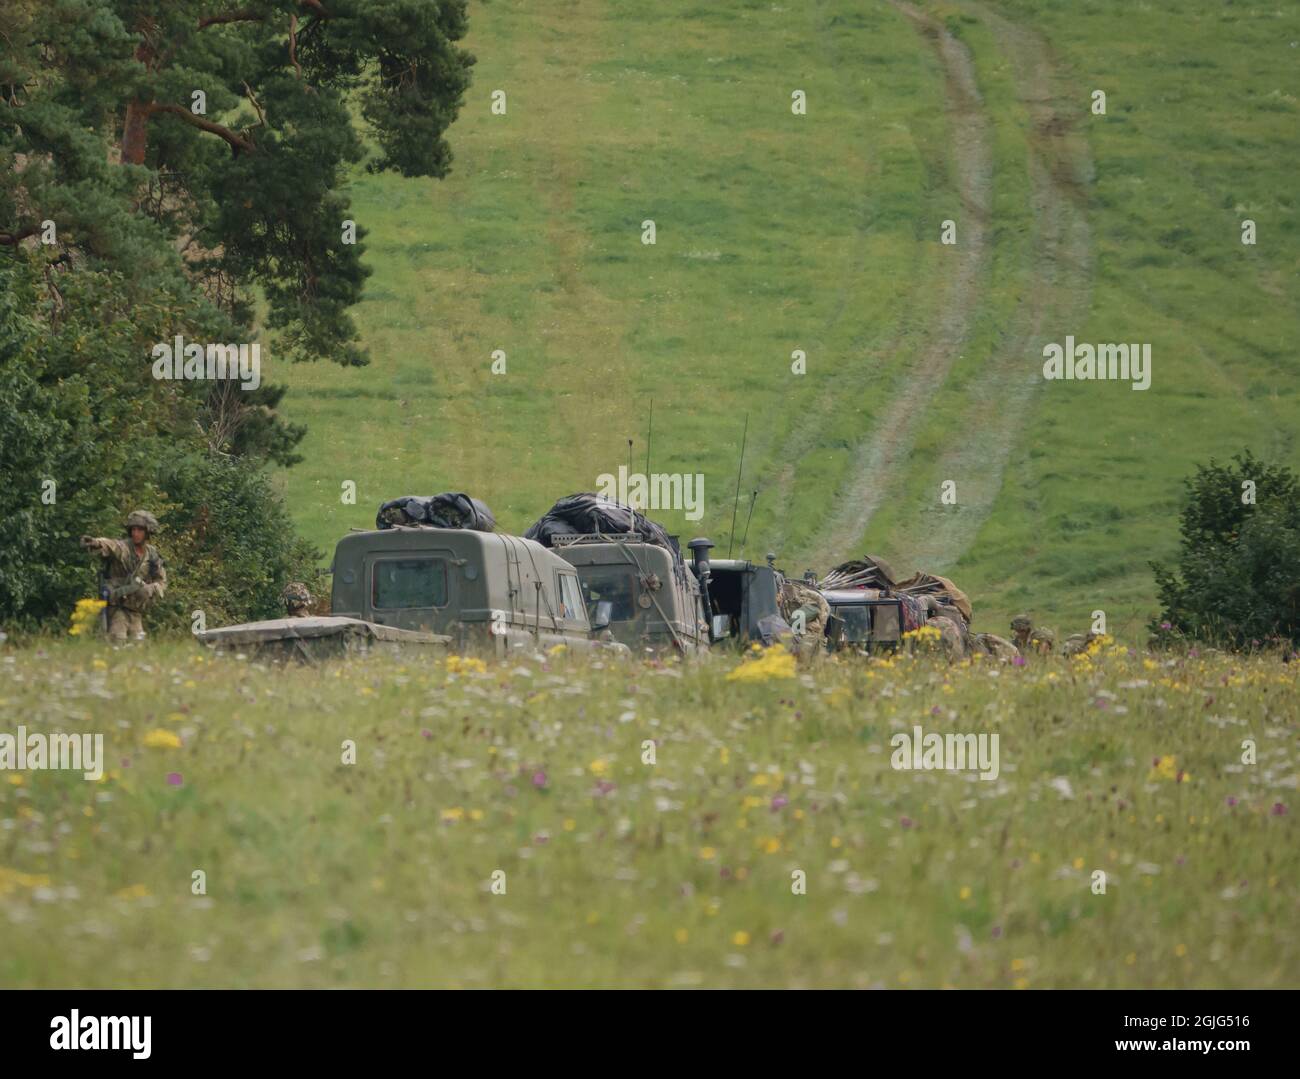 British army Land Rover Wolf 4×4 military light utility vehicle convoy with foot soldiers deployed on exercise, Salisbury Plain UK Stock Photo